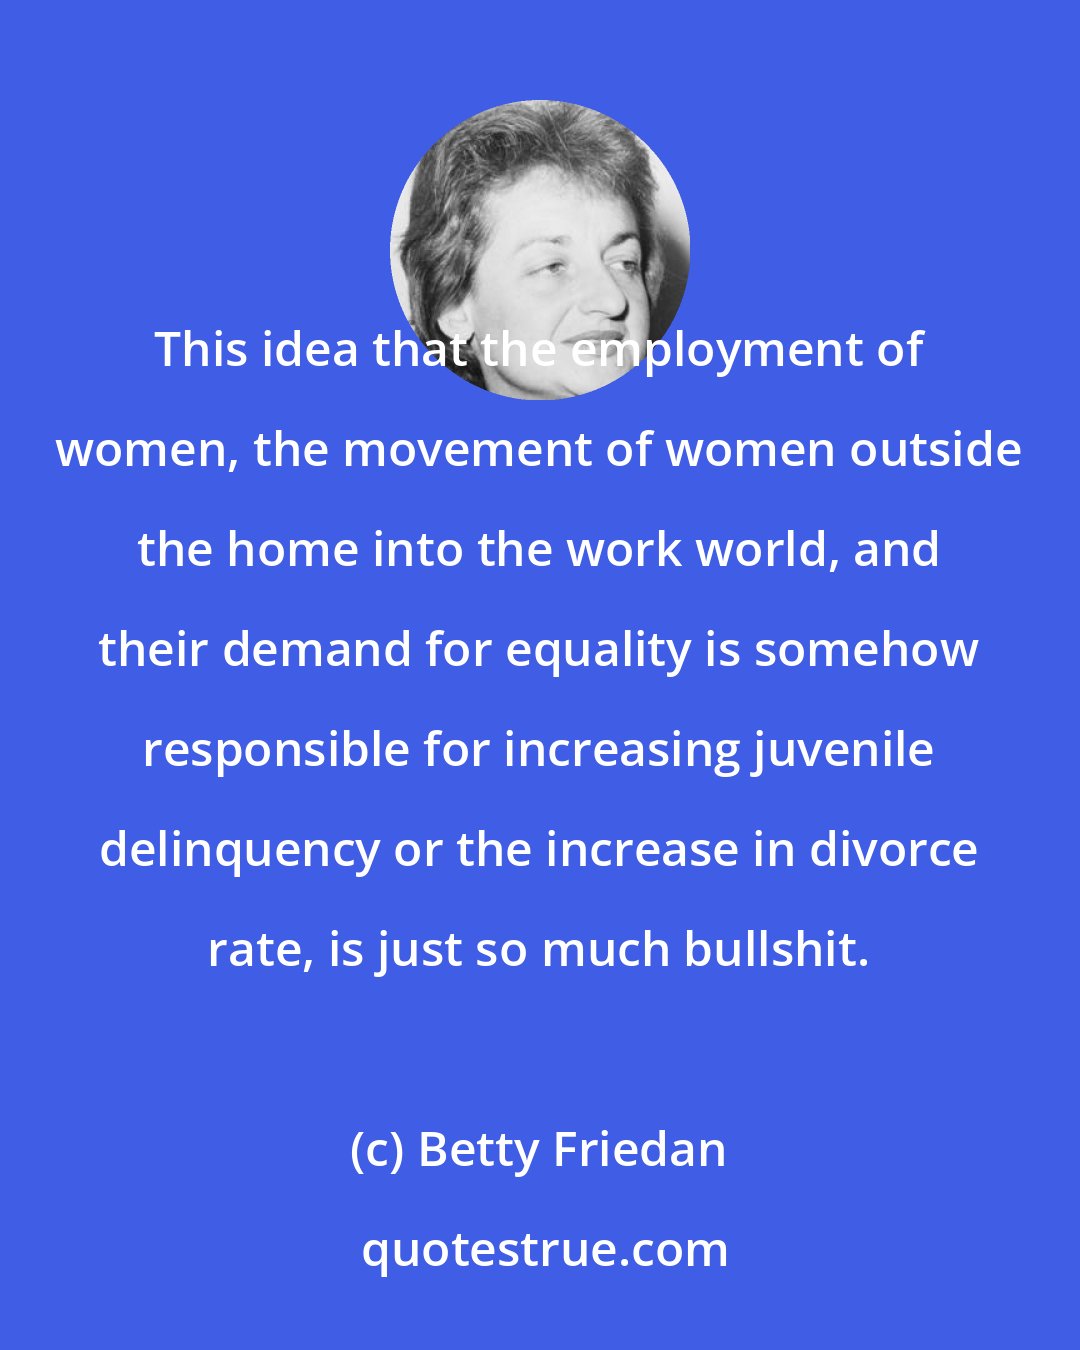 Betty Friedan: This idea that the employment of women, the movement of women outside the home into the work world, and their demand for equality is somehow responsible for increasing juvenile delinquency or the increase in divorce rate, is just so much bullshit.